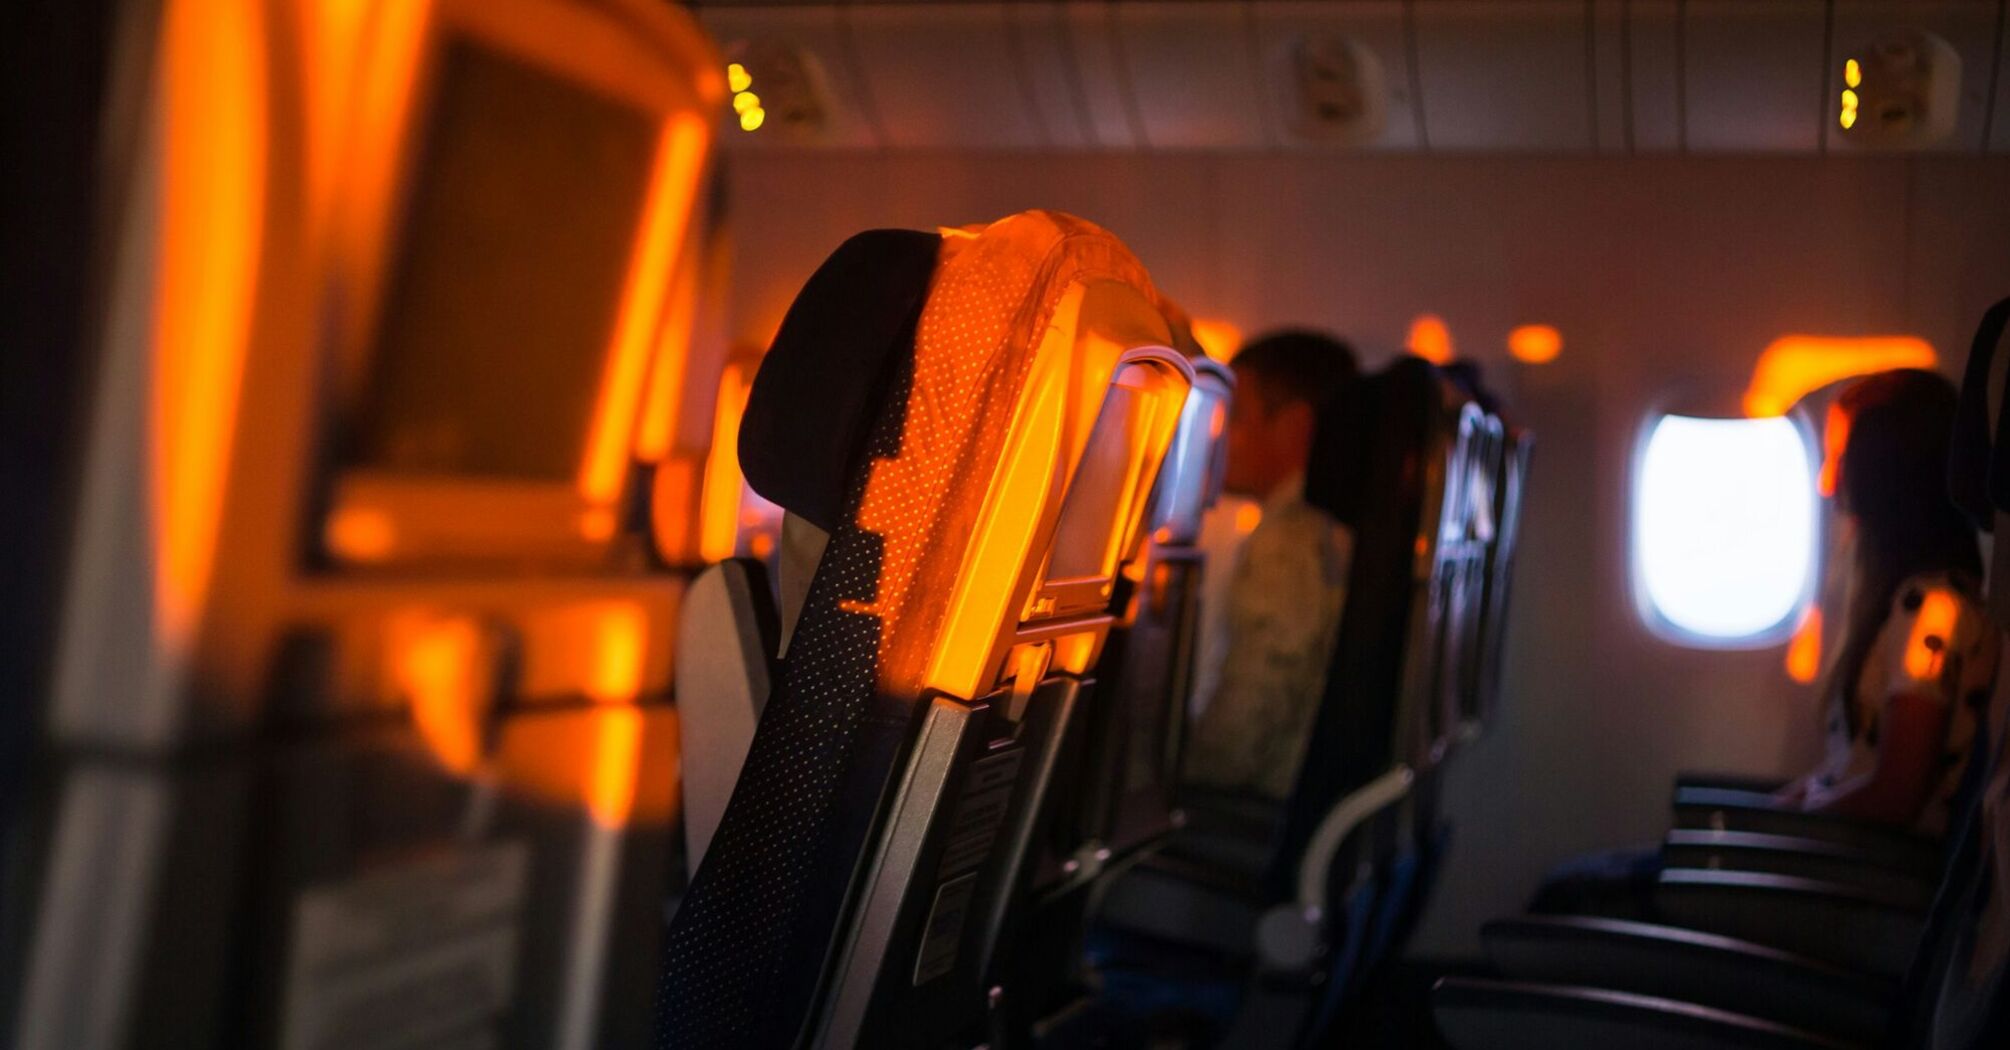 An airplane cabin with dimmed lighting, showing rows of seats and a window in the background